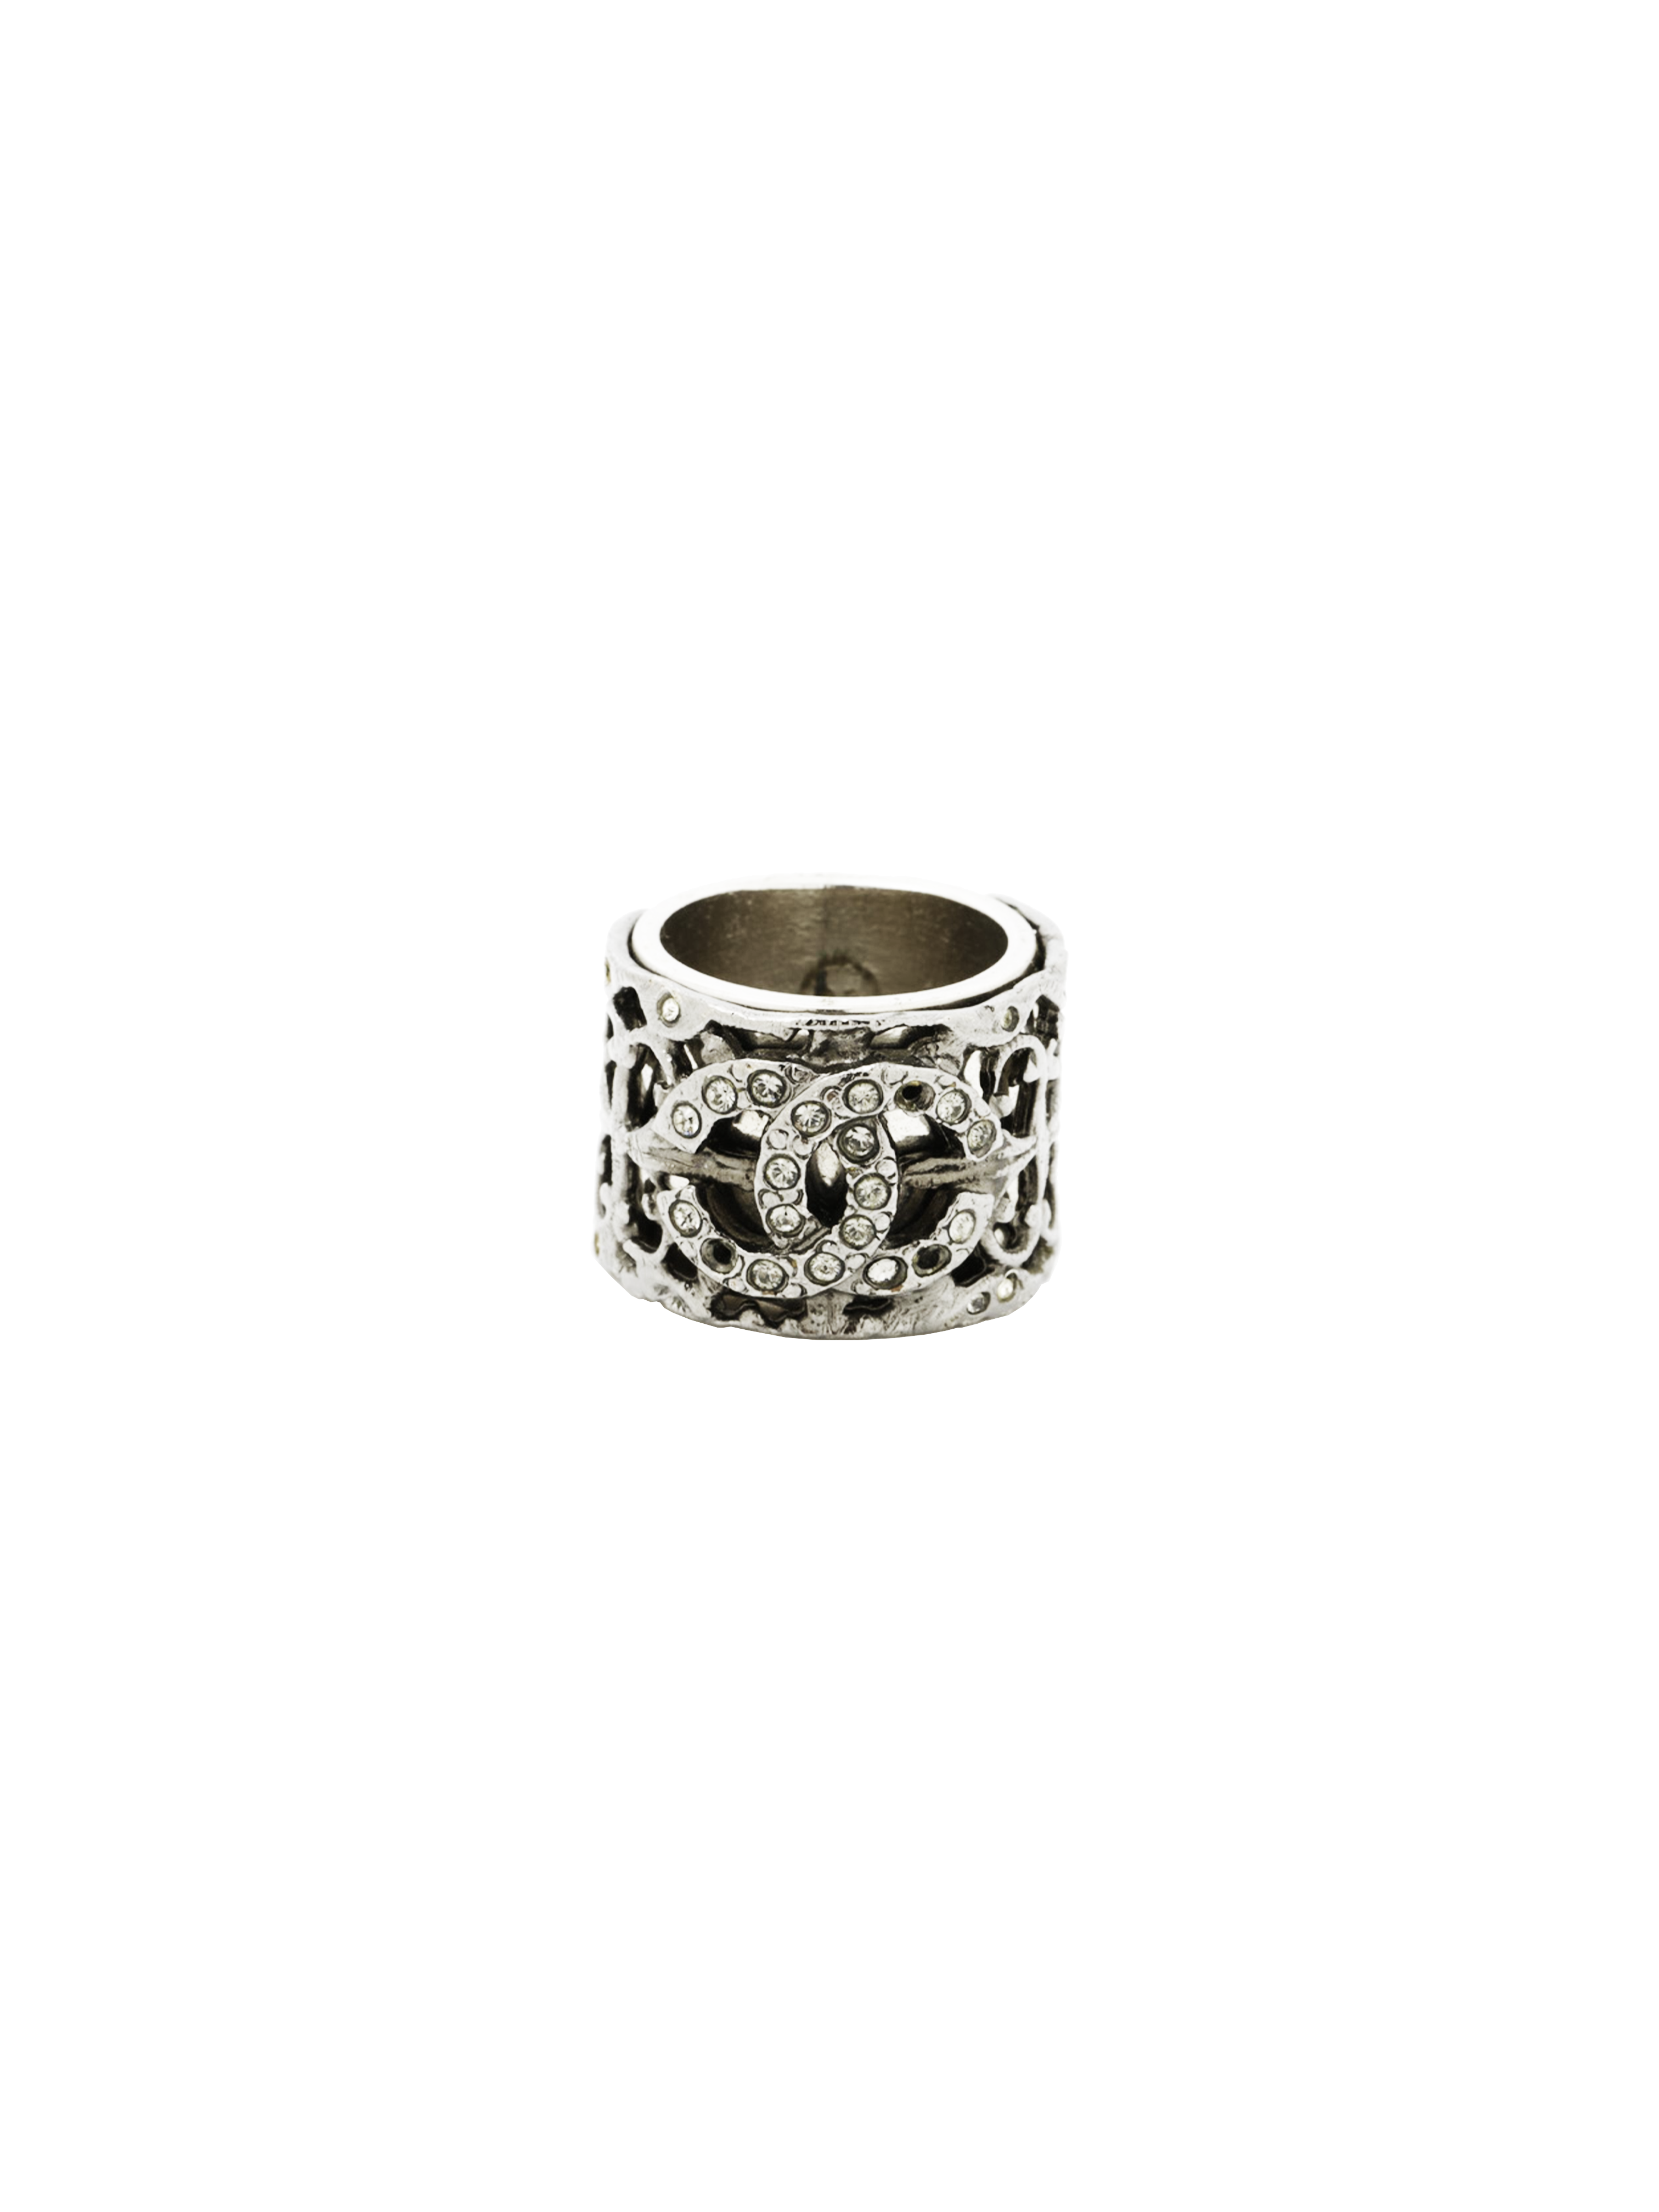 Chanel Rings for Sale: Online Auctions